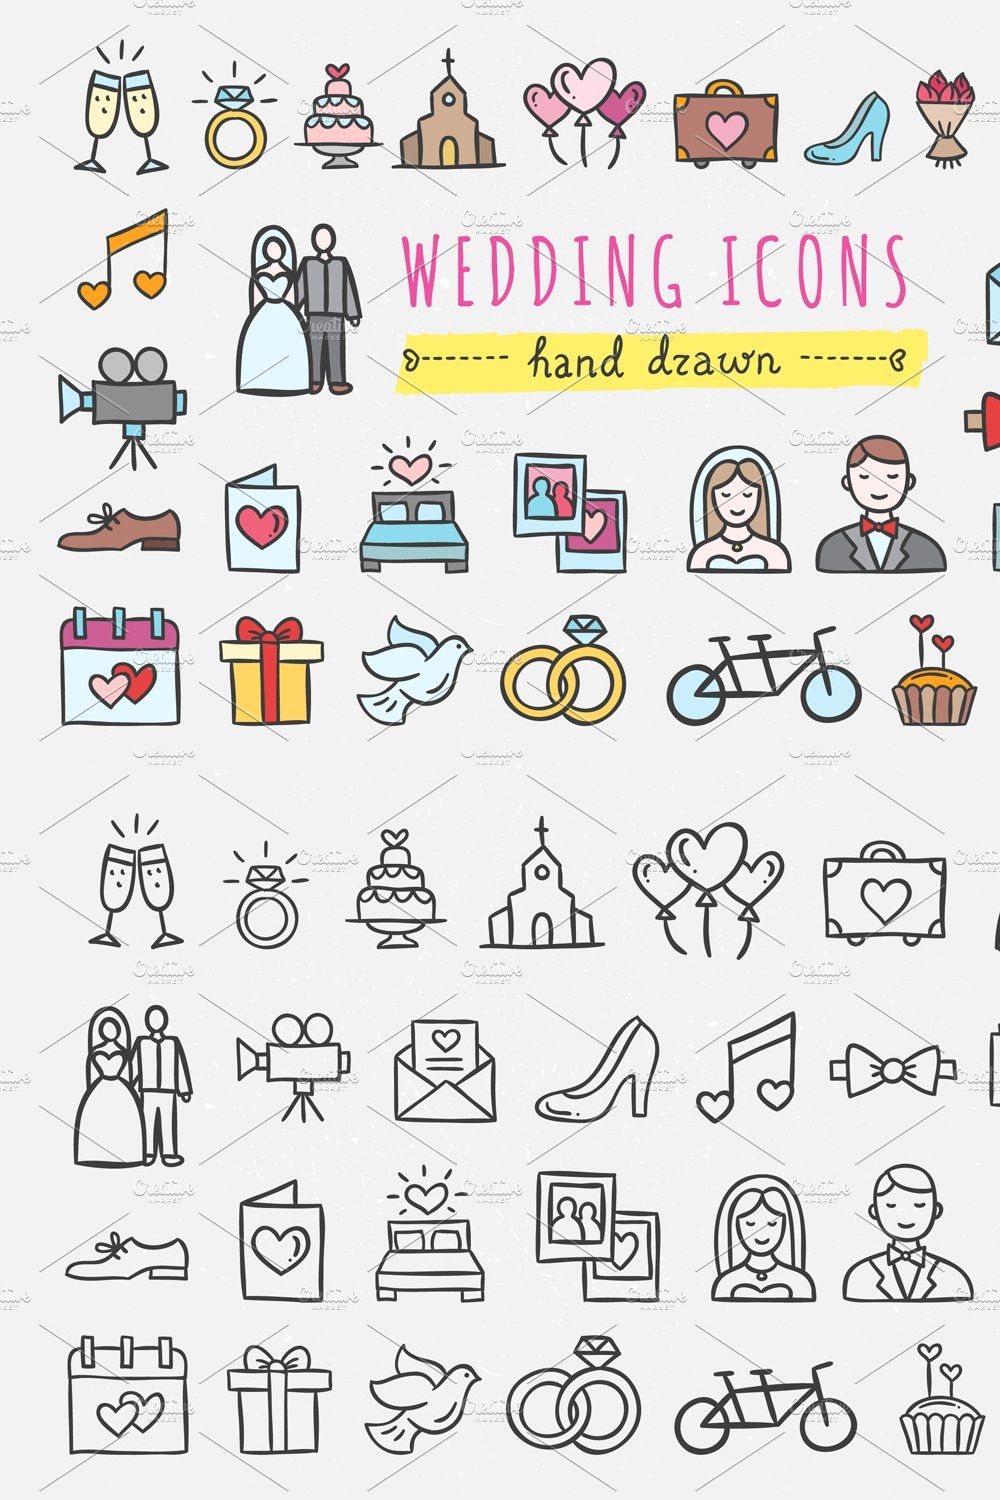 Wedding icons pinterest preview image.